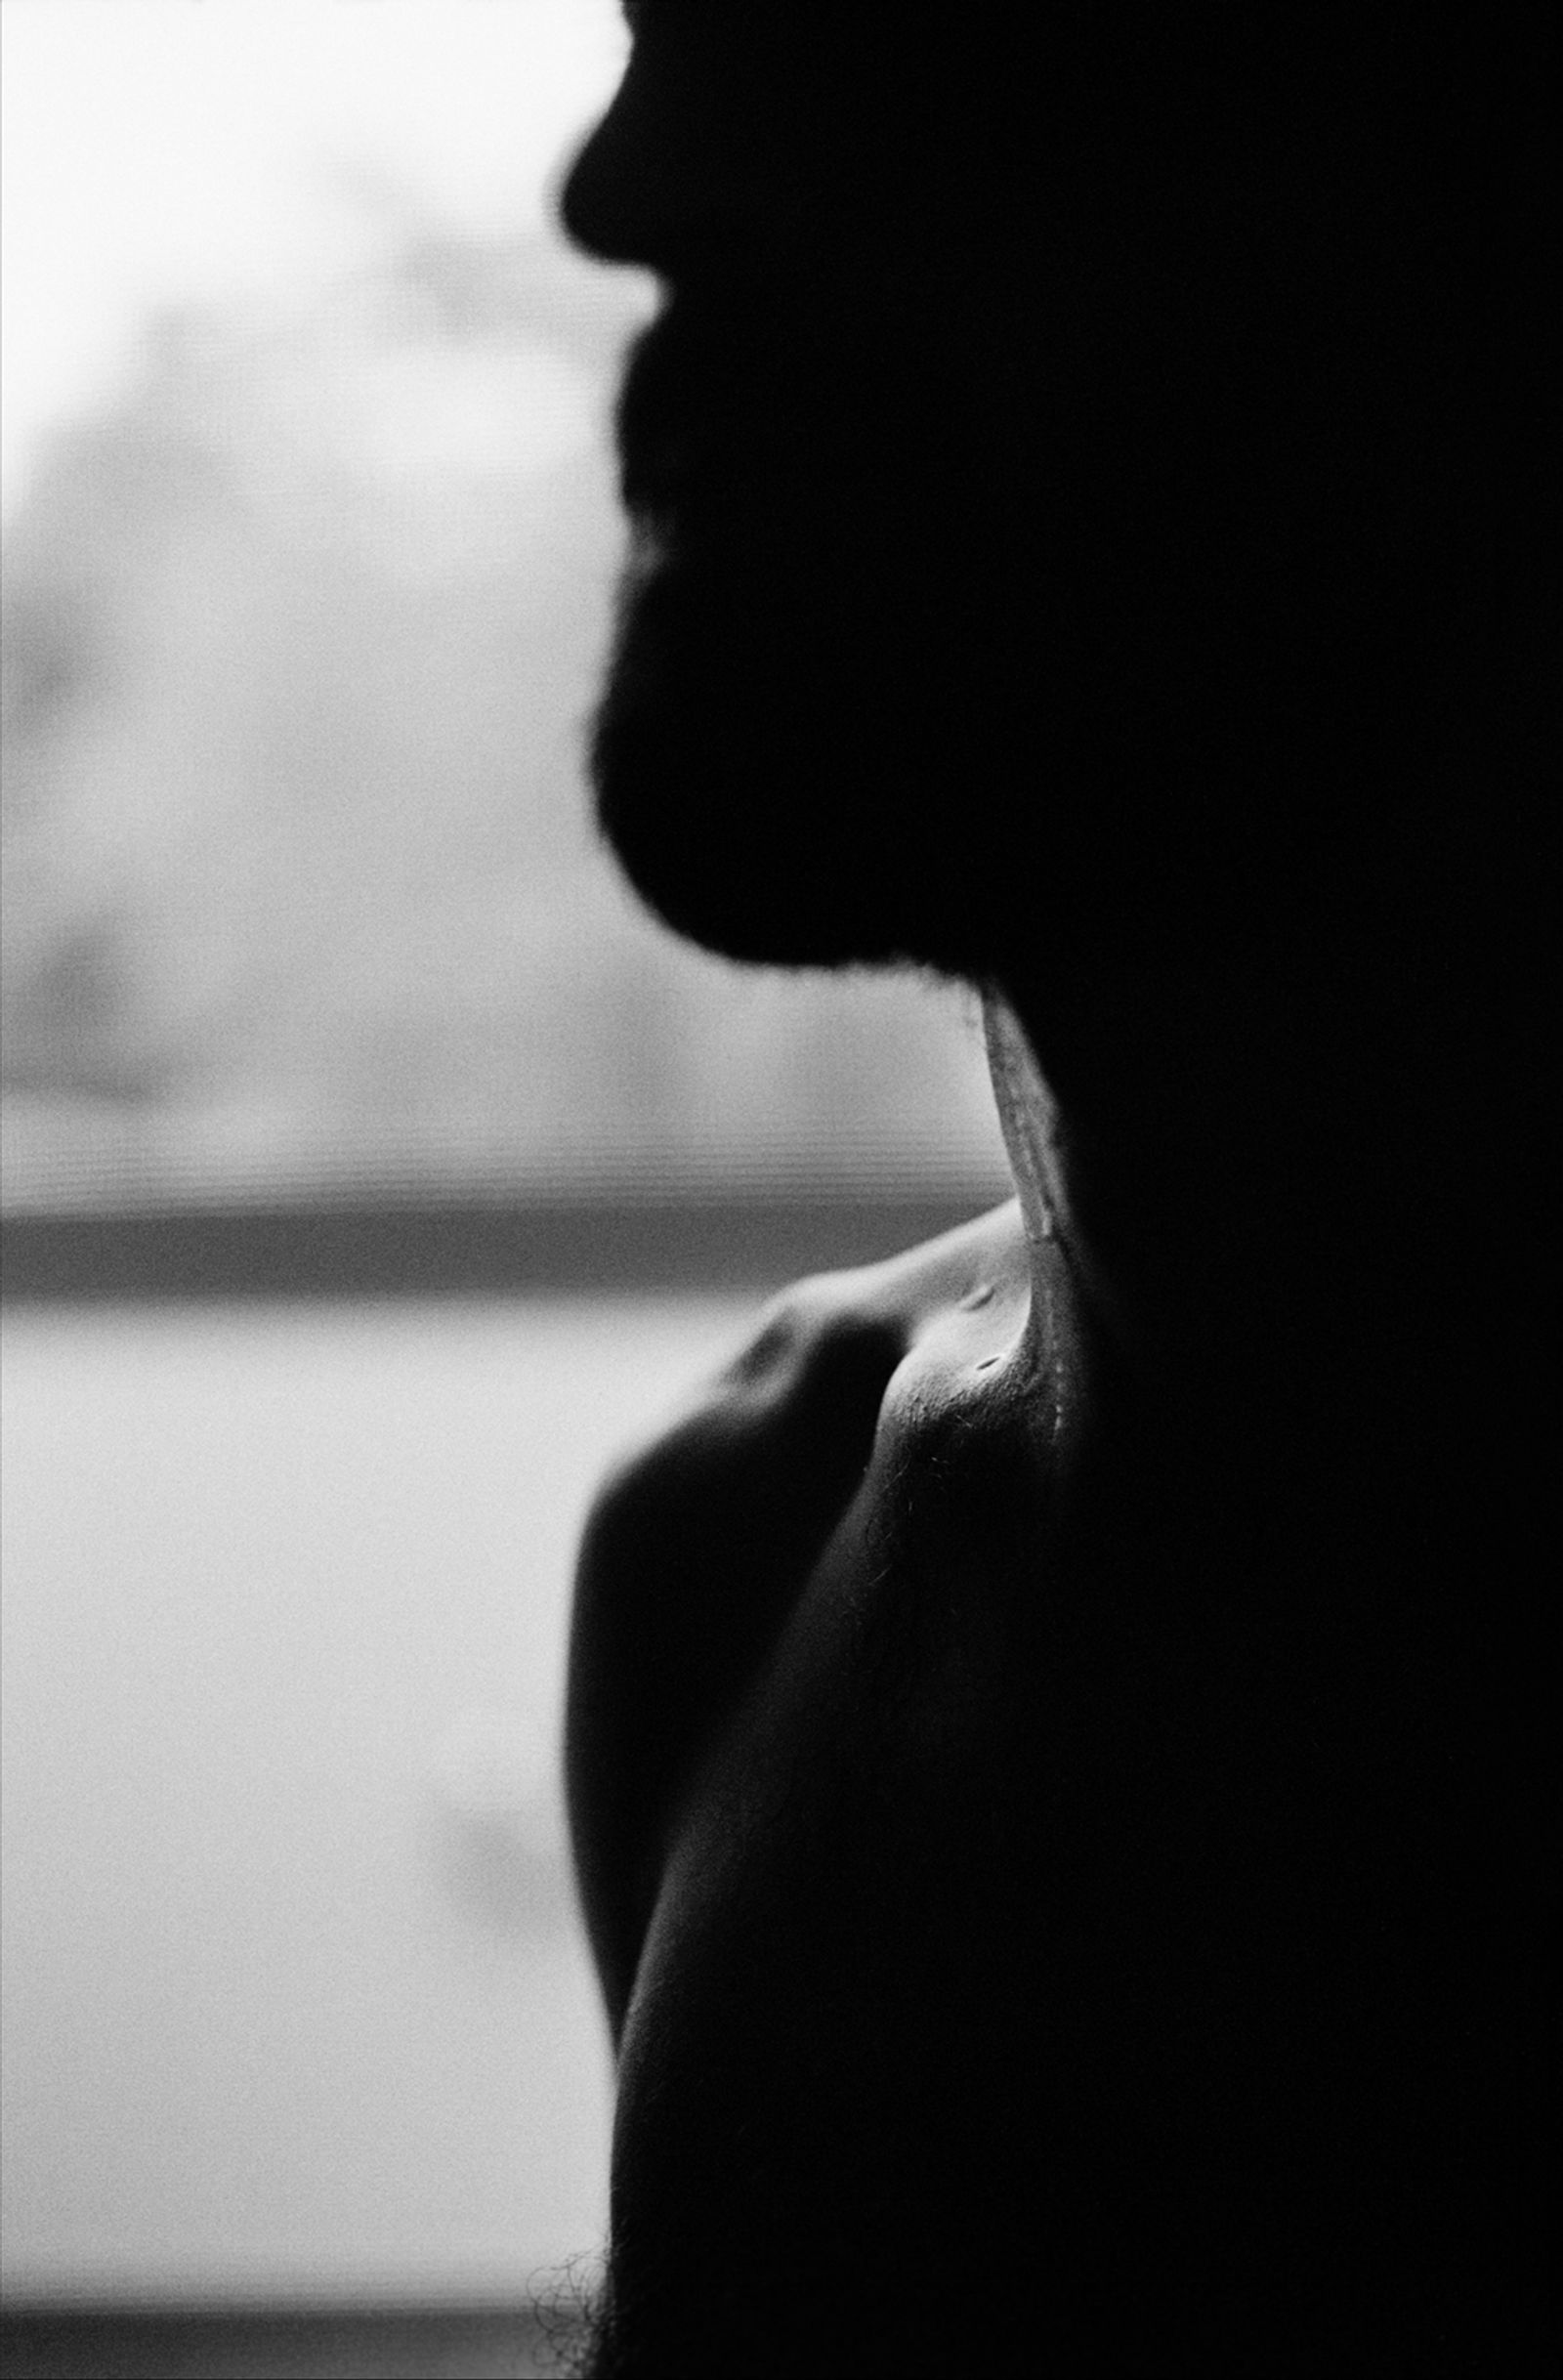 © Giulia Berto - The sweat reminding me of the softness of your skin.